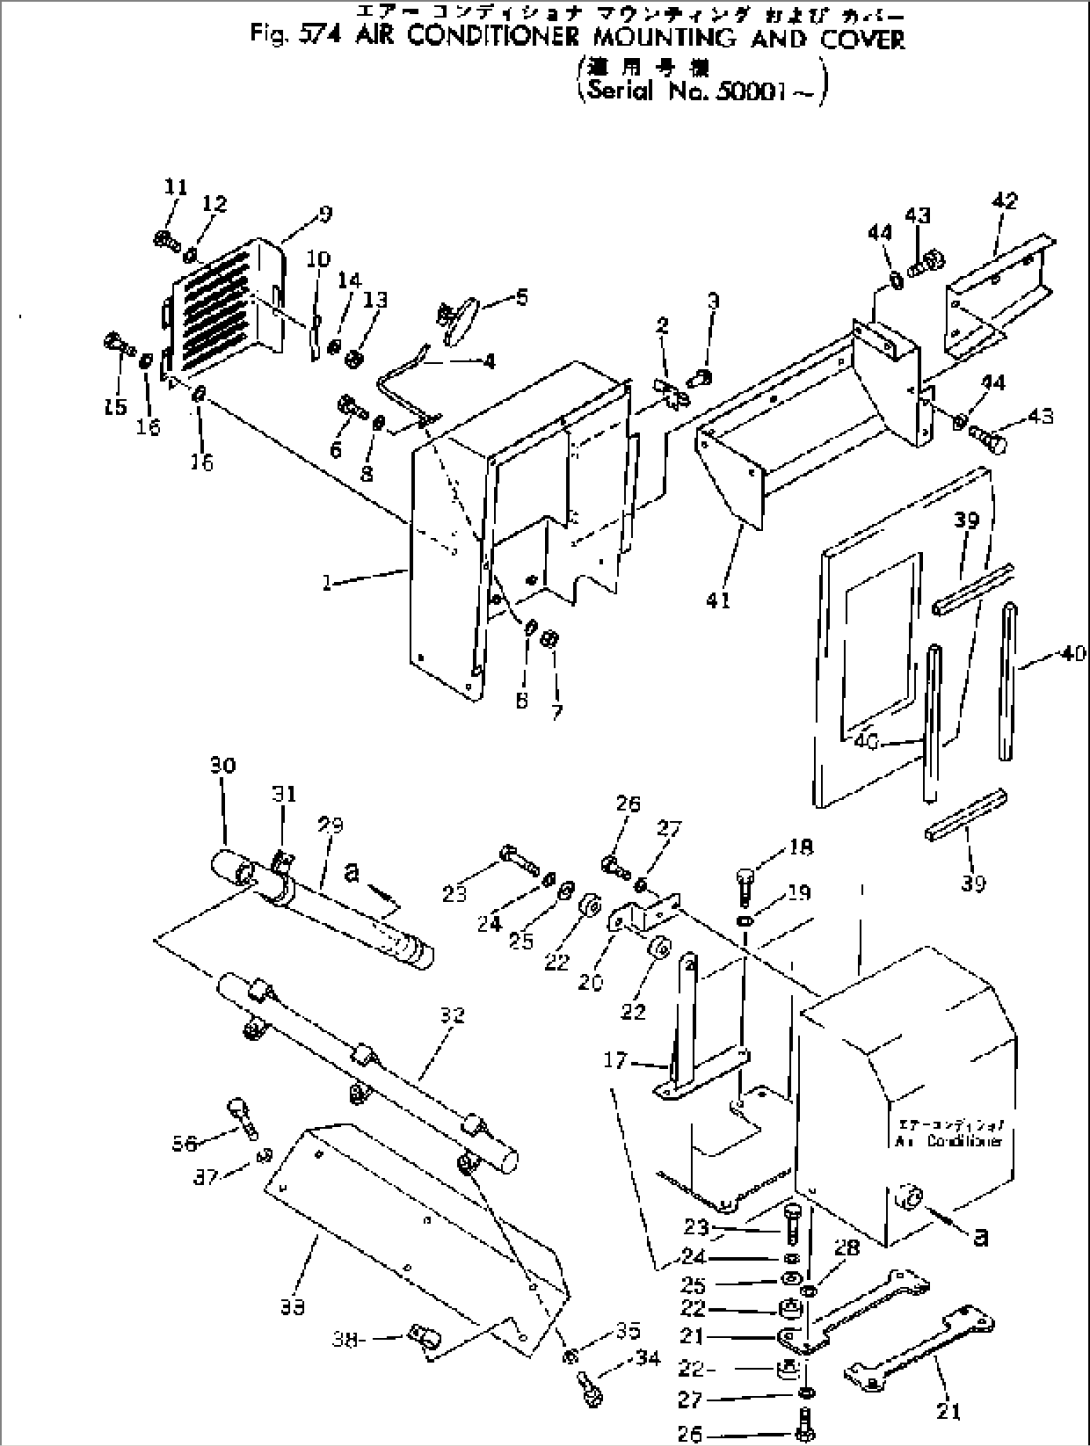 AIR CONDITIONER MOUNTING AND COVER(#50001-)